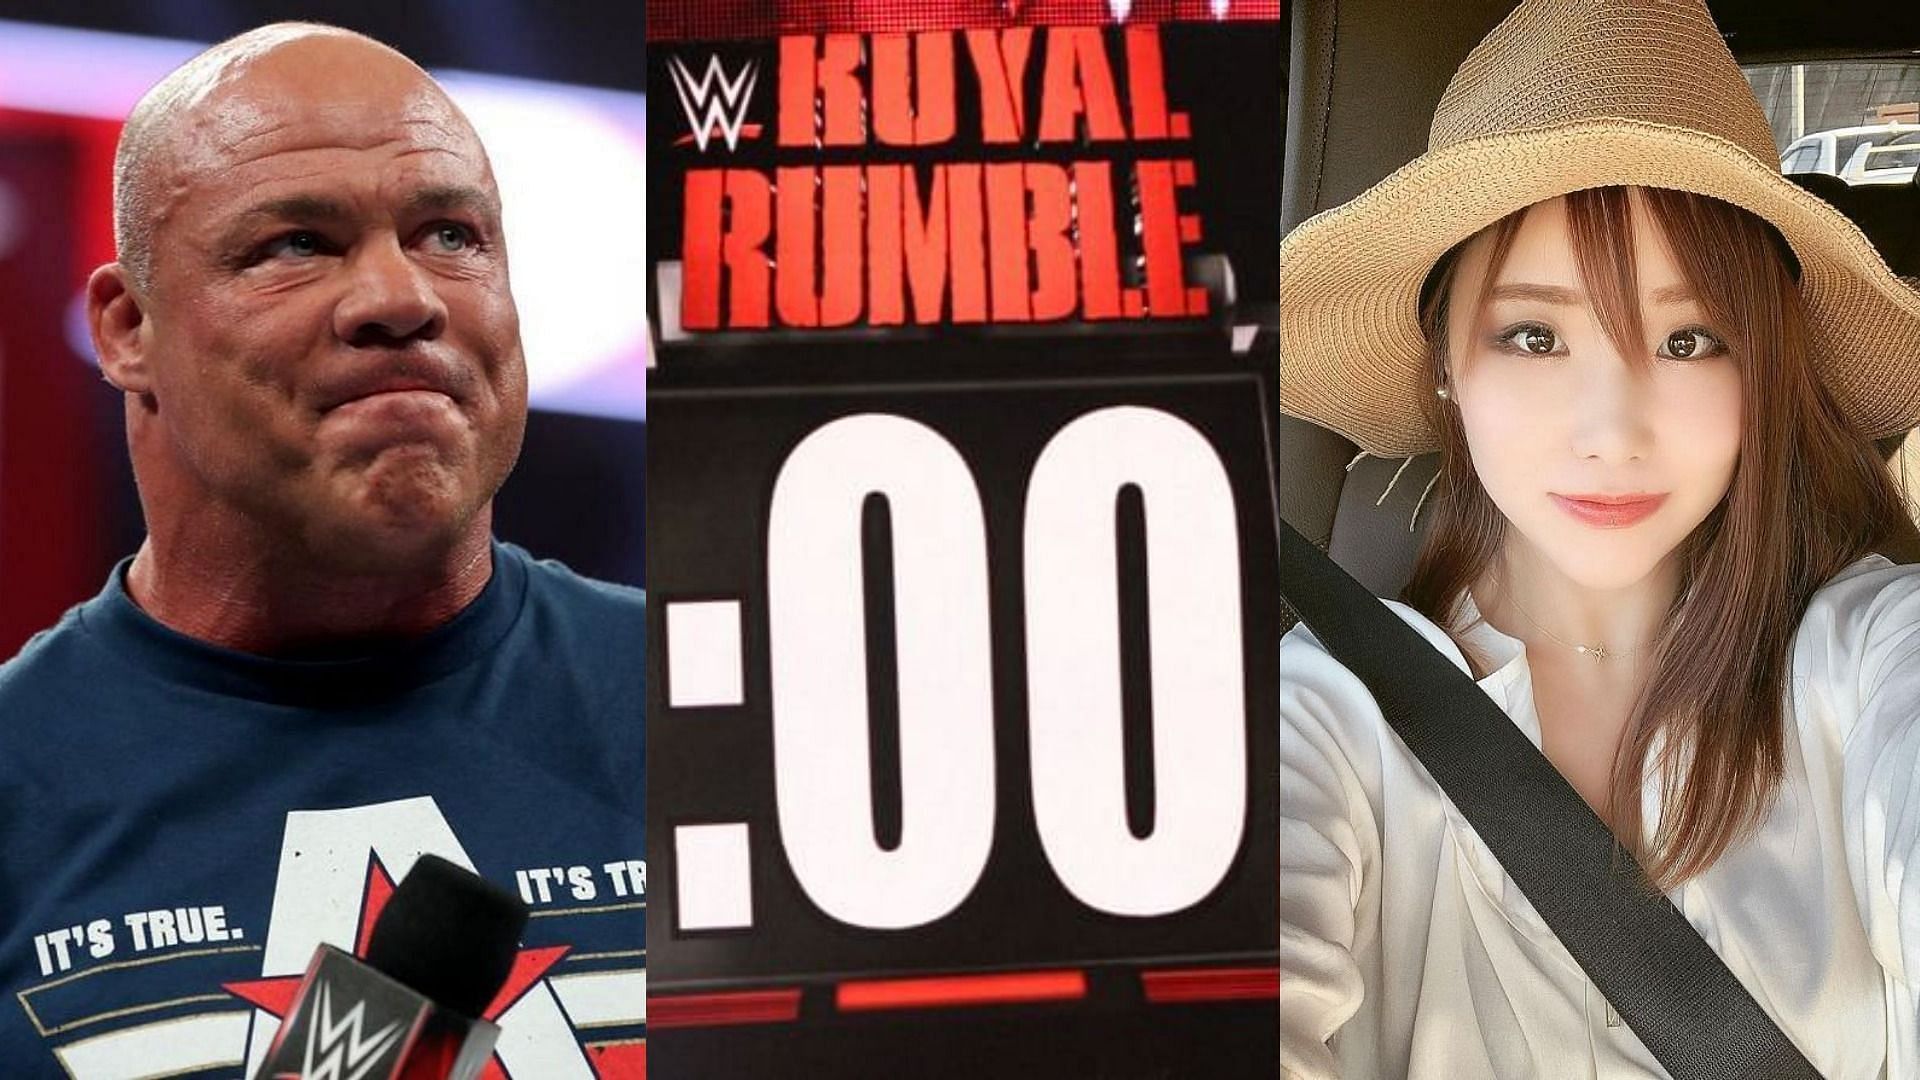 Who could show up at the Rumble this year?